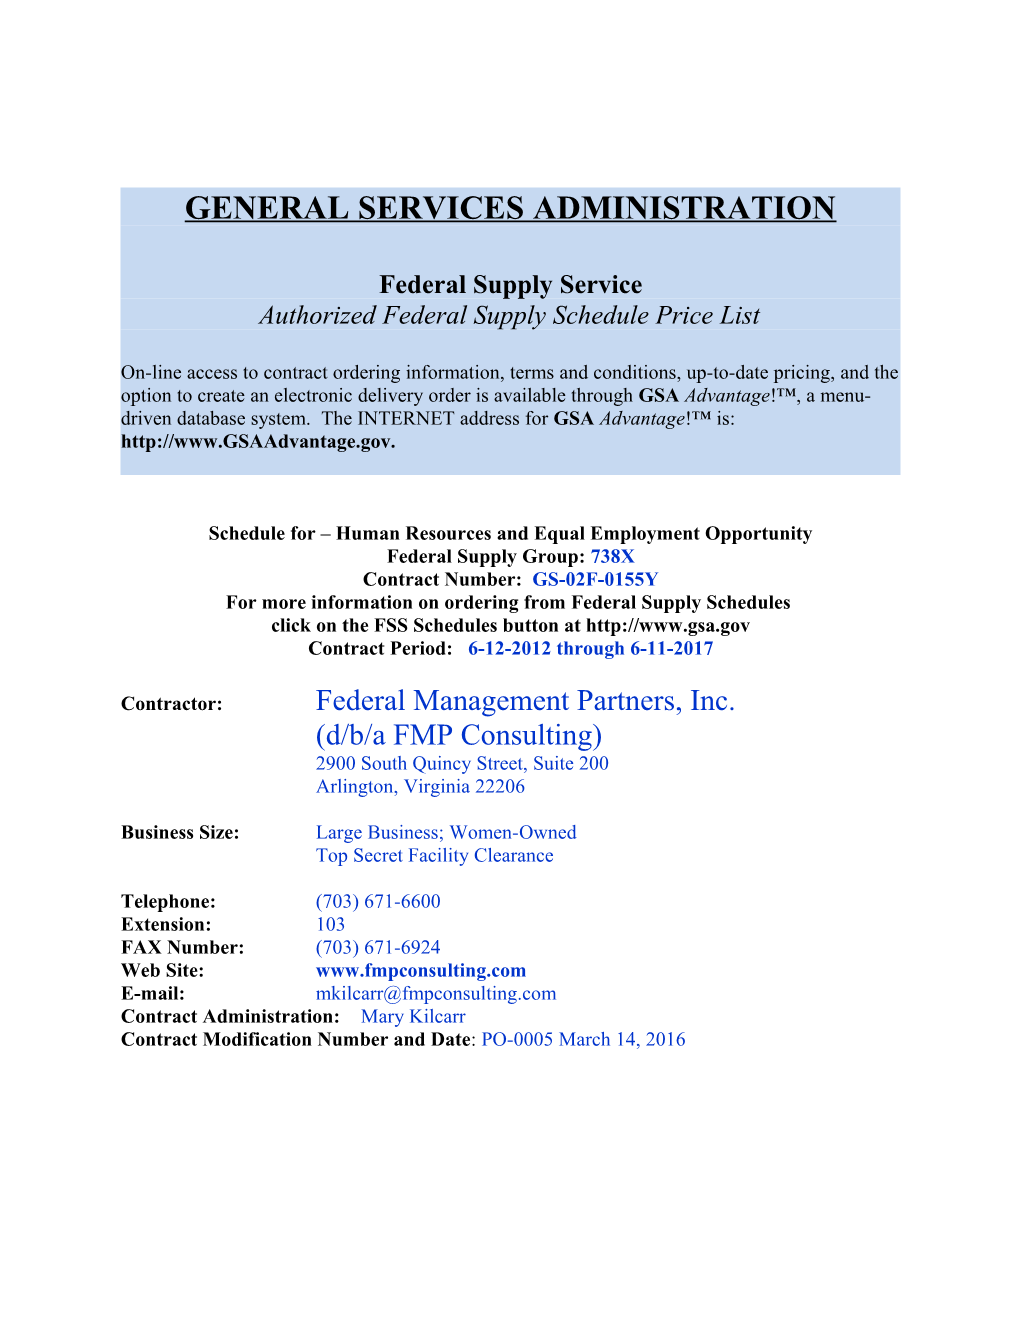 General Services Administration s4